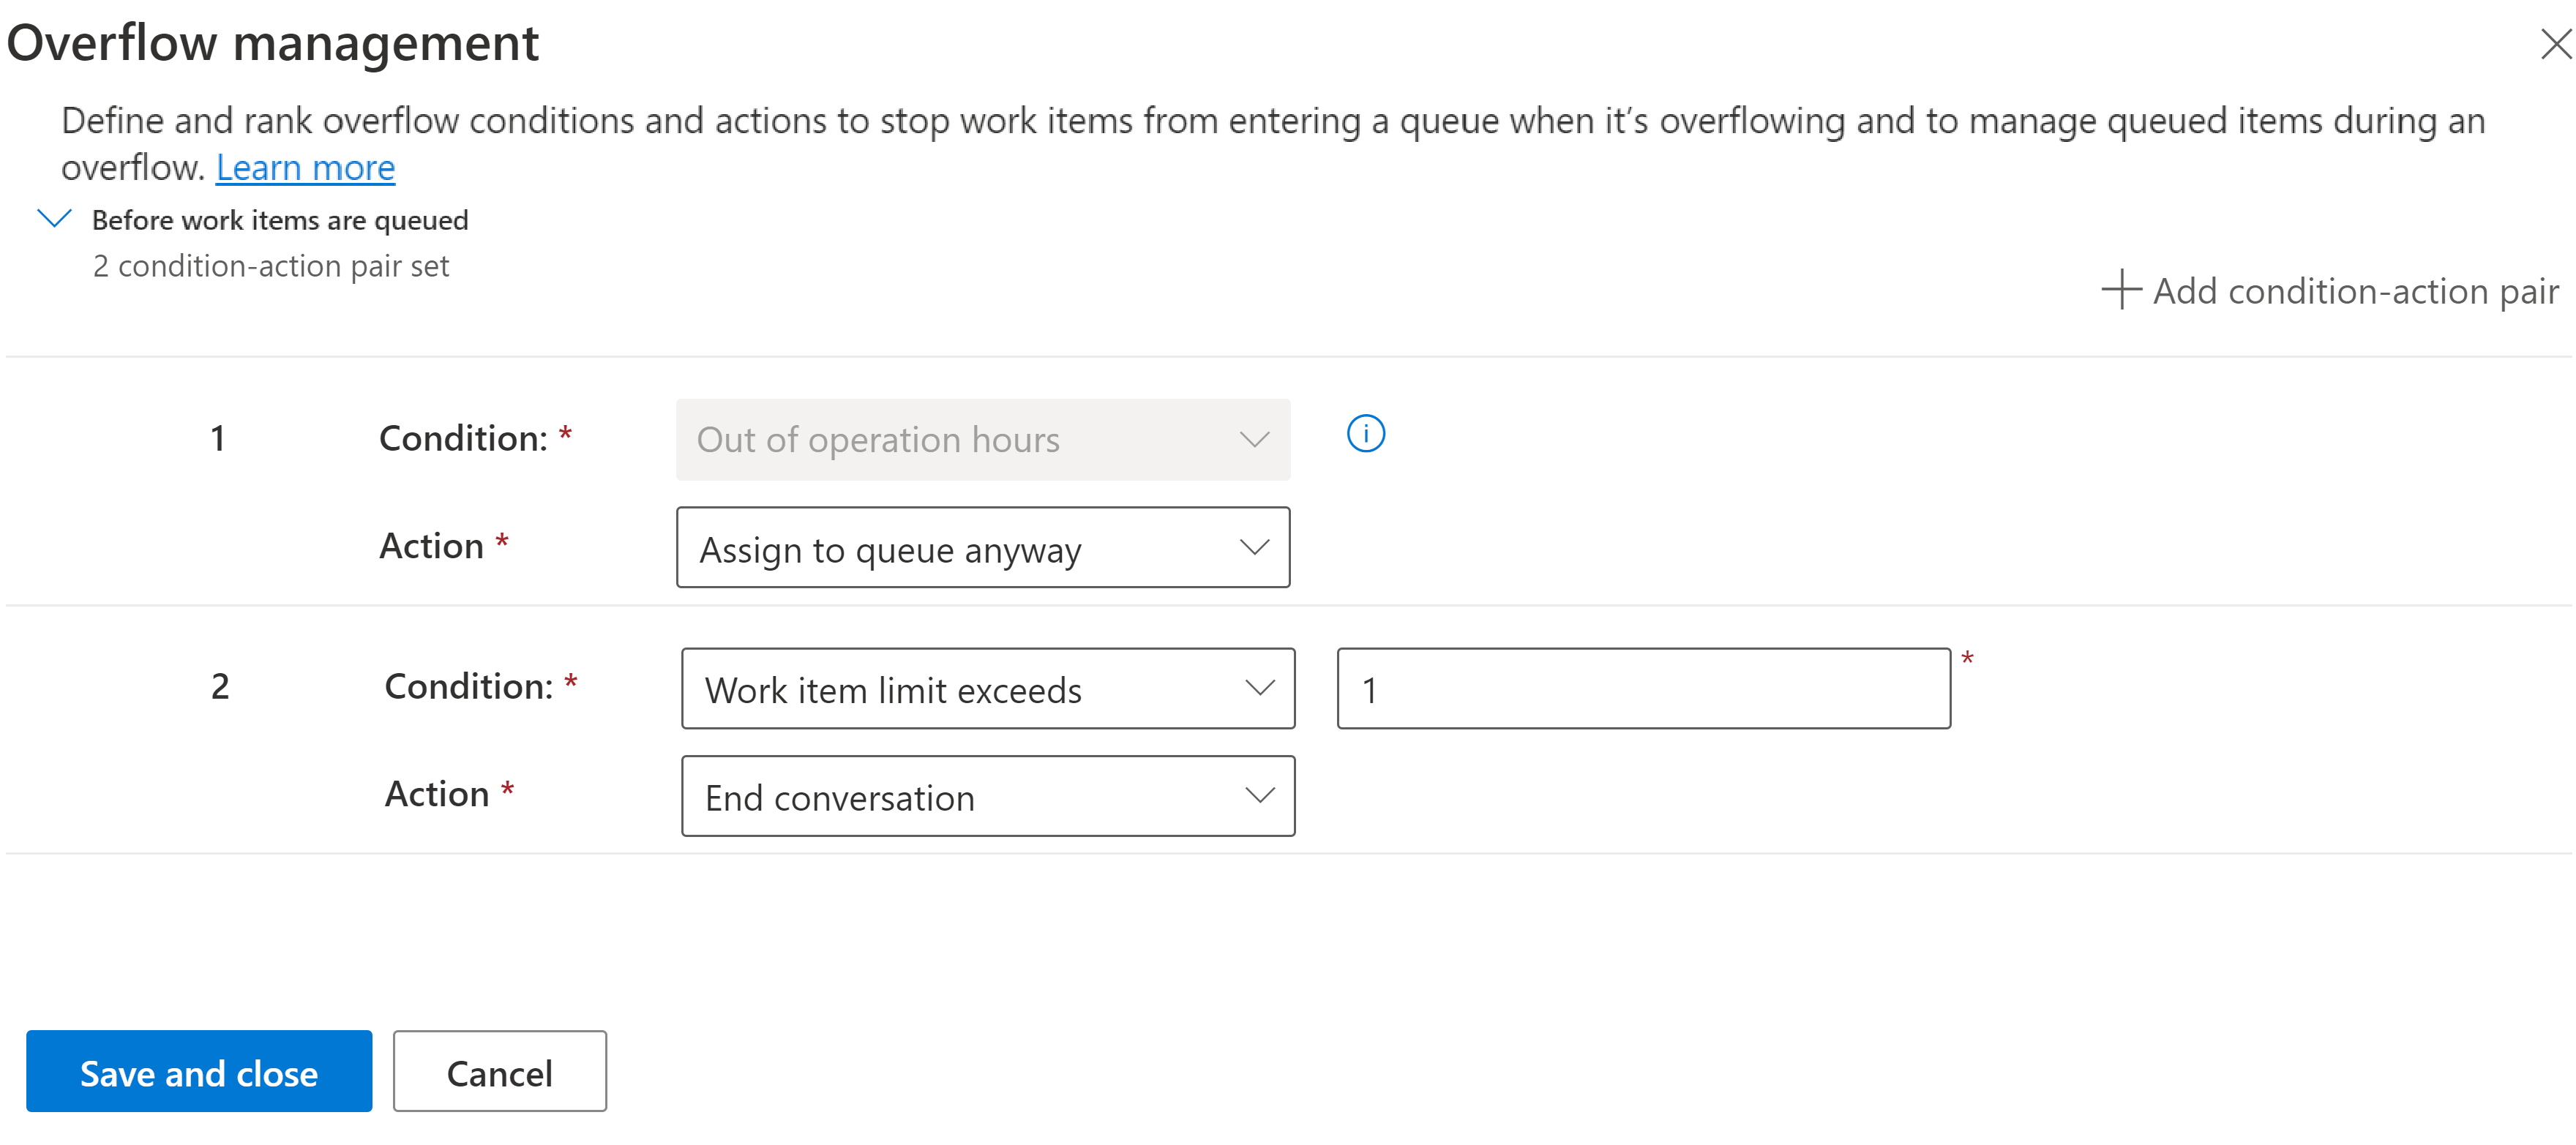 Manage overflow of work items in queues | Microsoft Learn